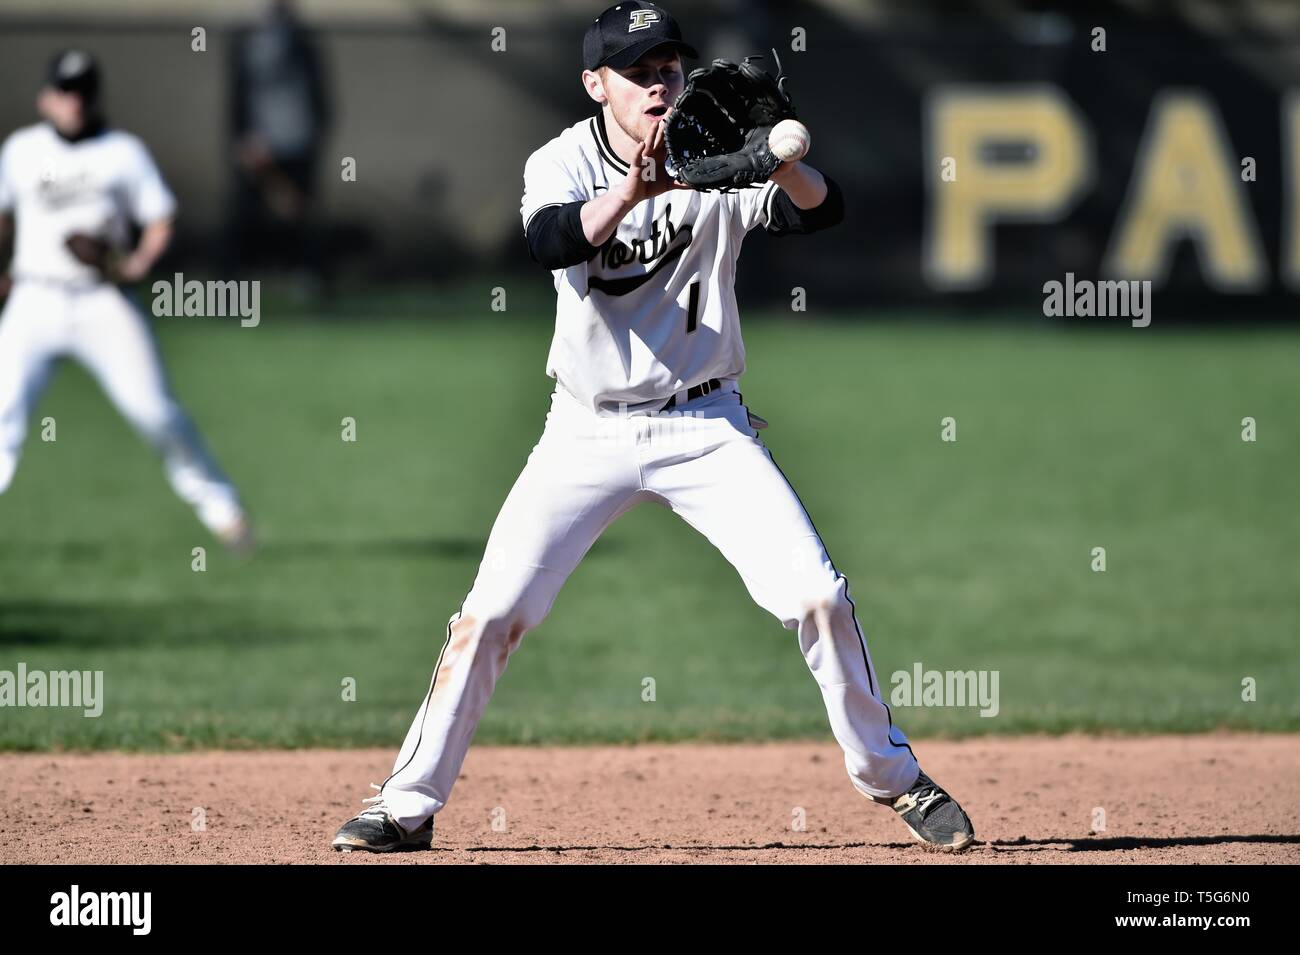 Third baseman fielding a ground ball on a high hop before throwing on to first base to retire the hitter. USA. Stock Photo